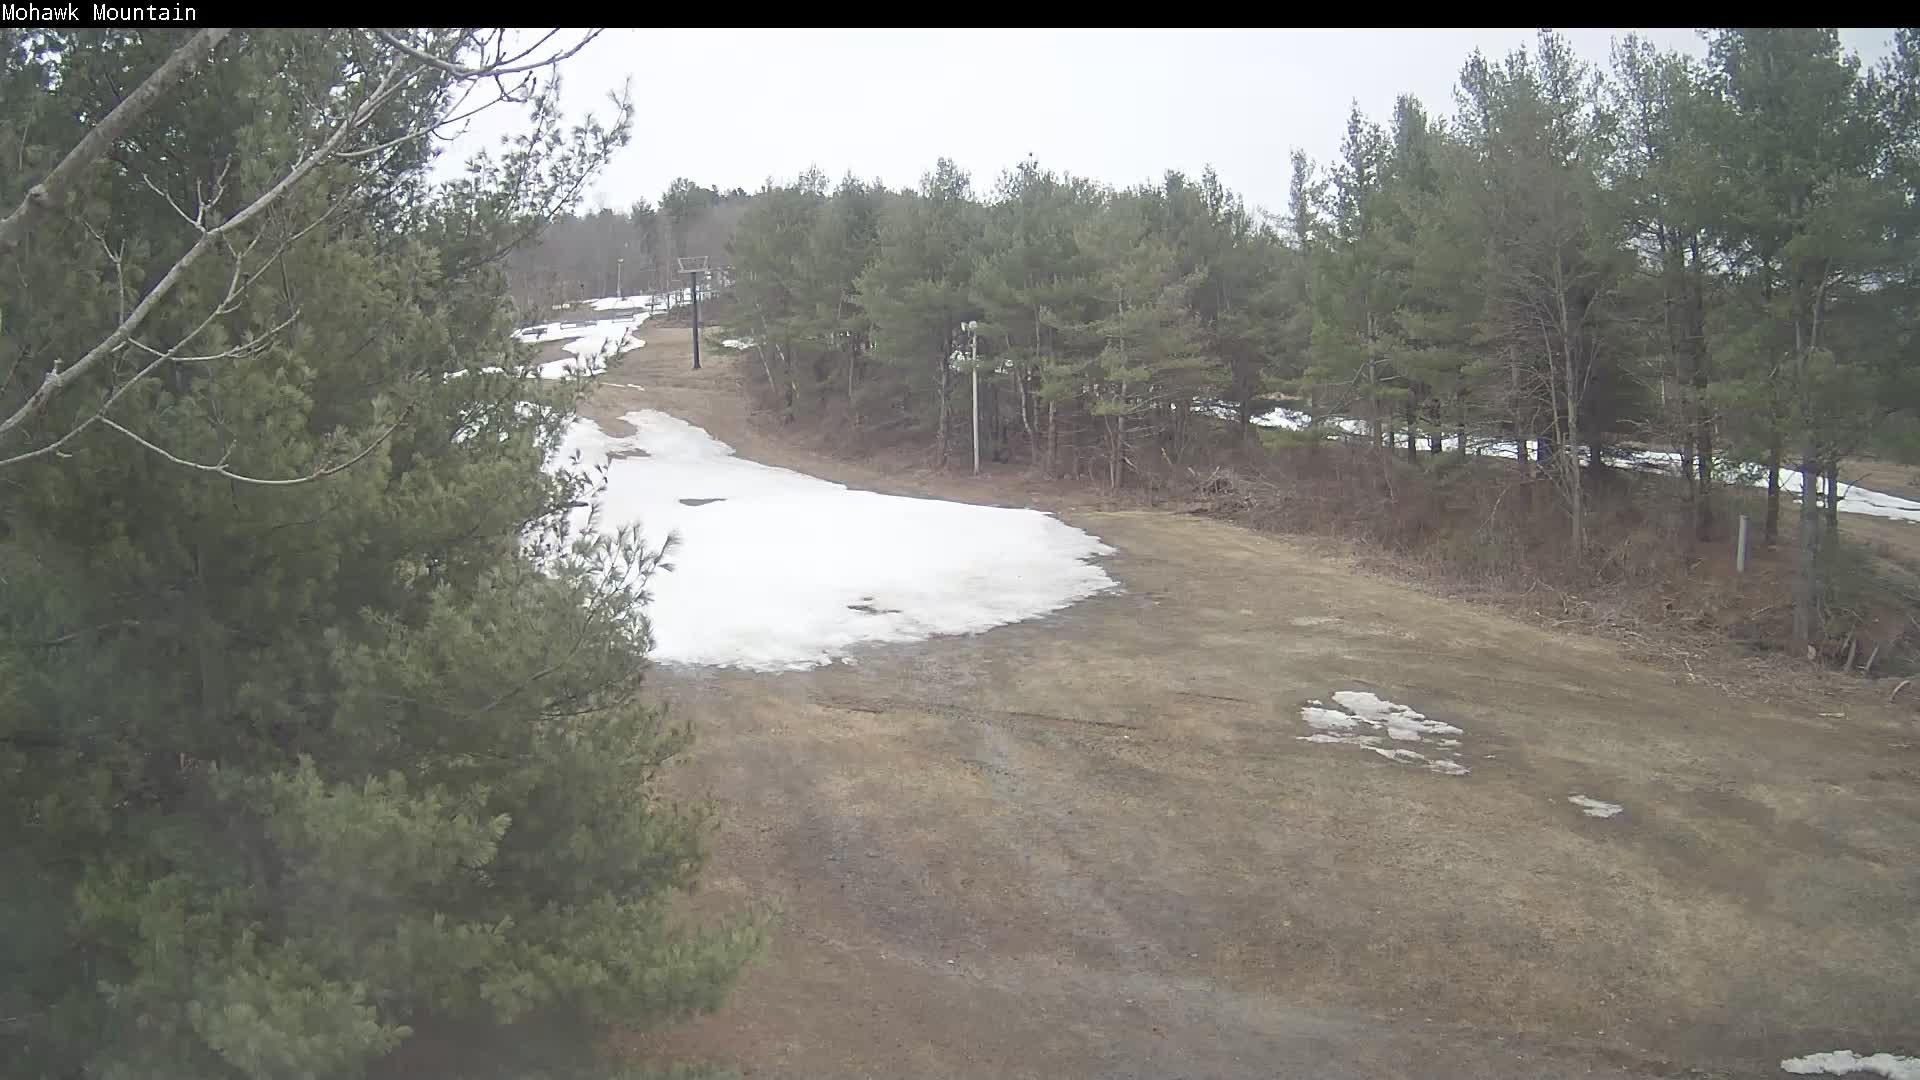 Traffic Cam Cornwall › South-East: Mohawk Mountain Player